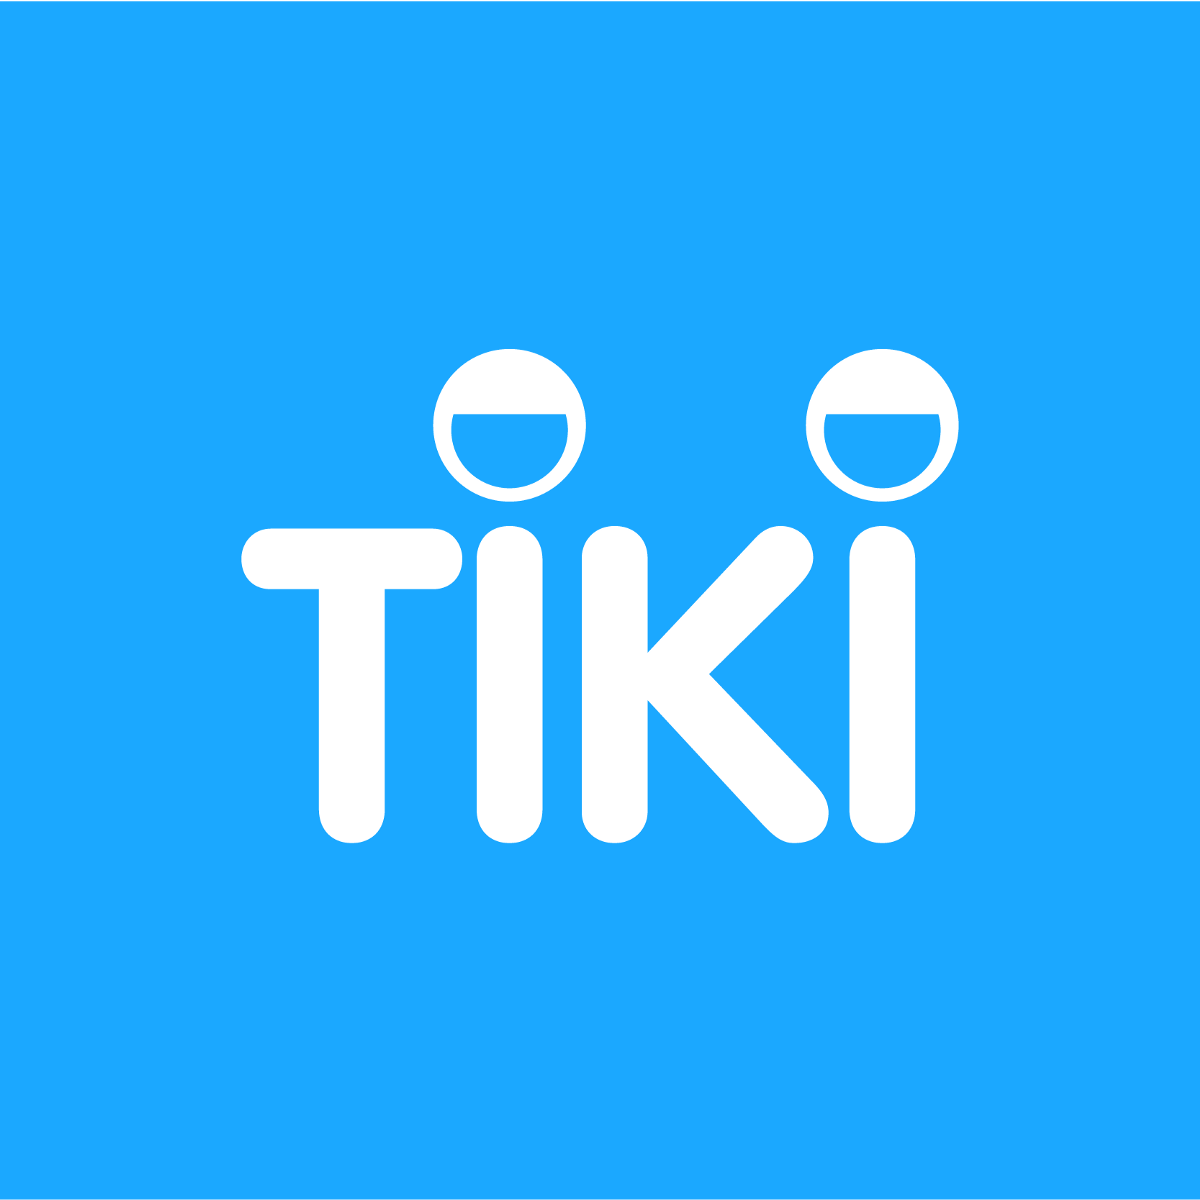 Tiki Tuyển Dụng Product Management Fresher/Intern - Digital Services Business